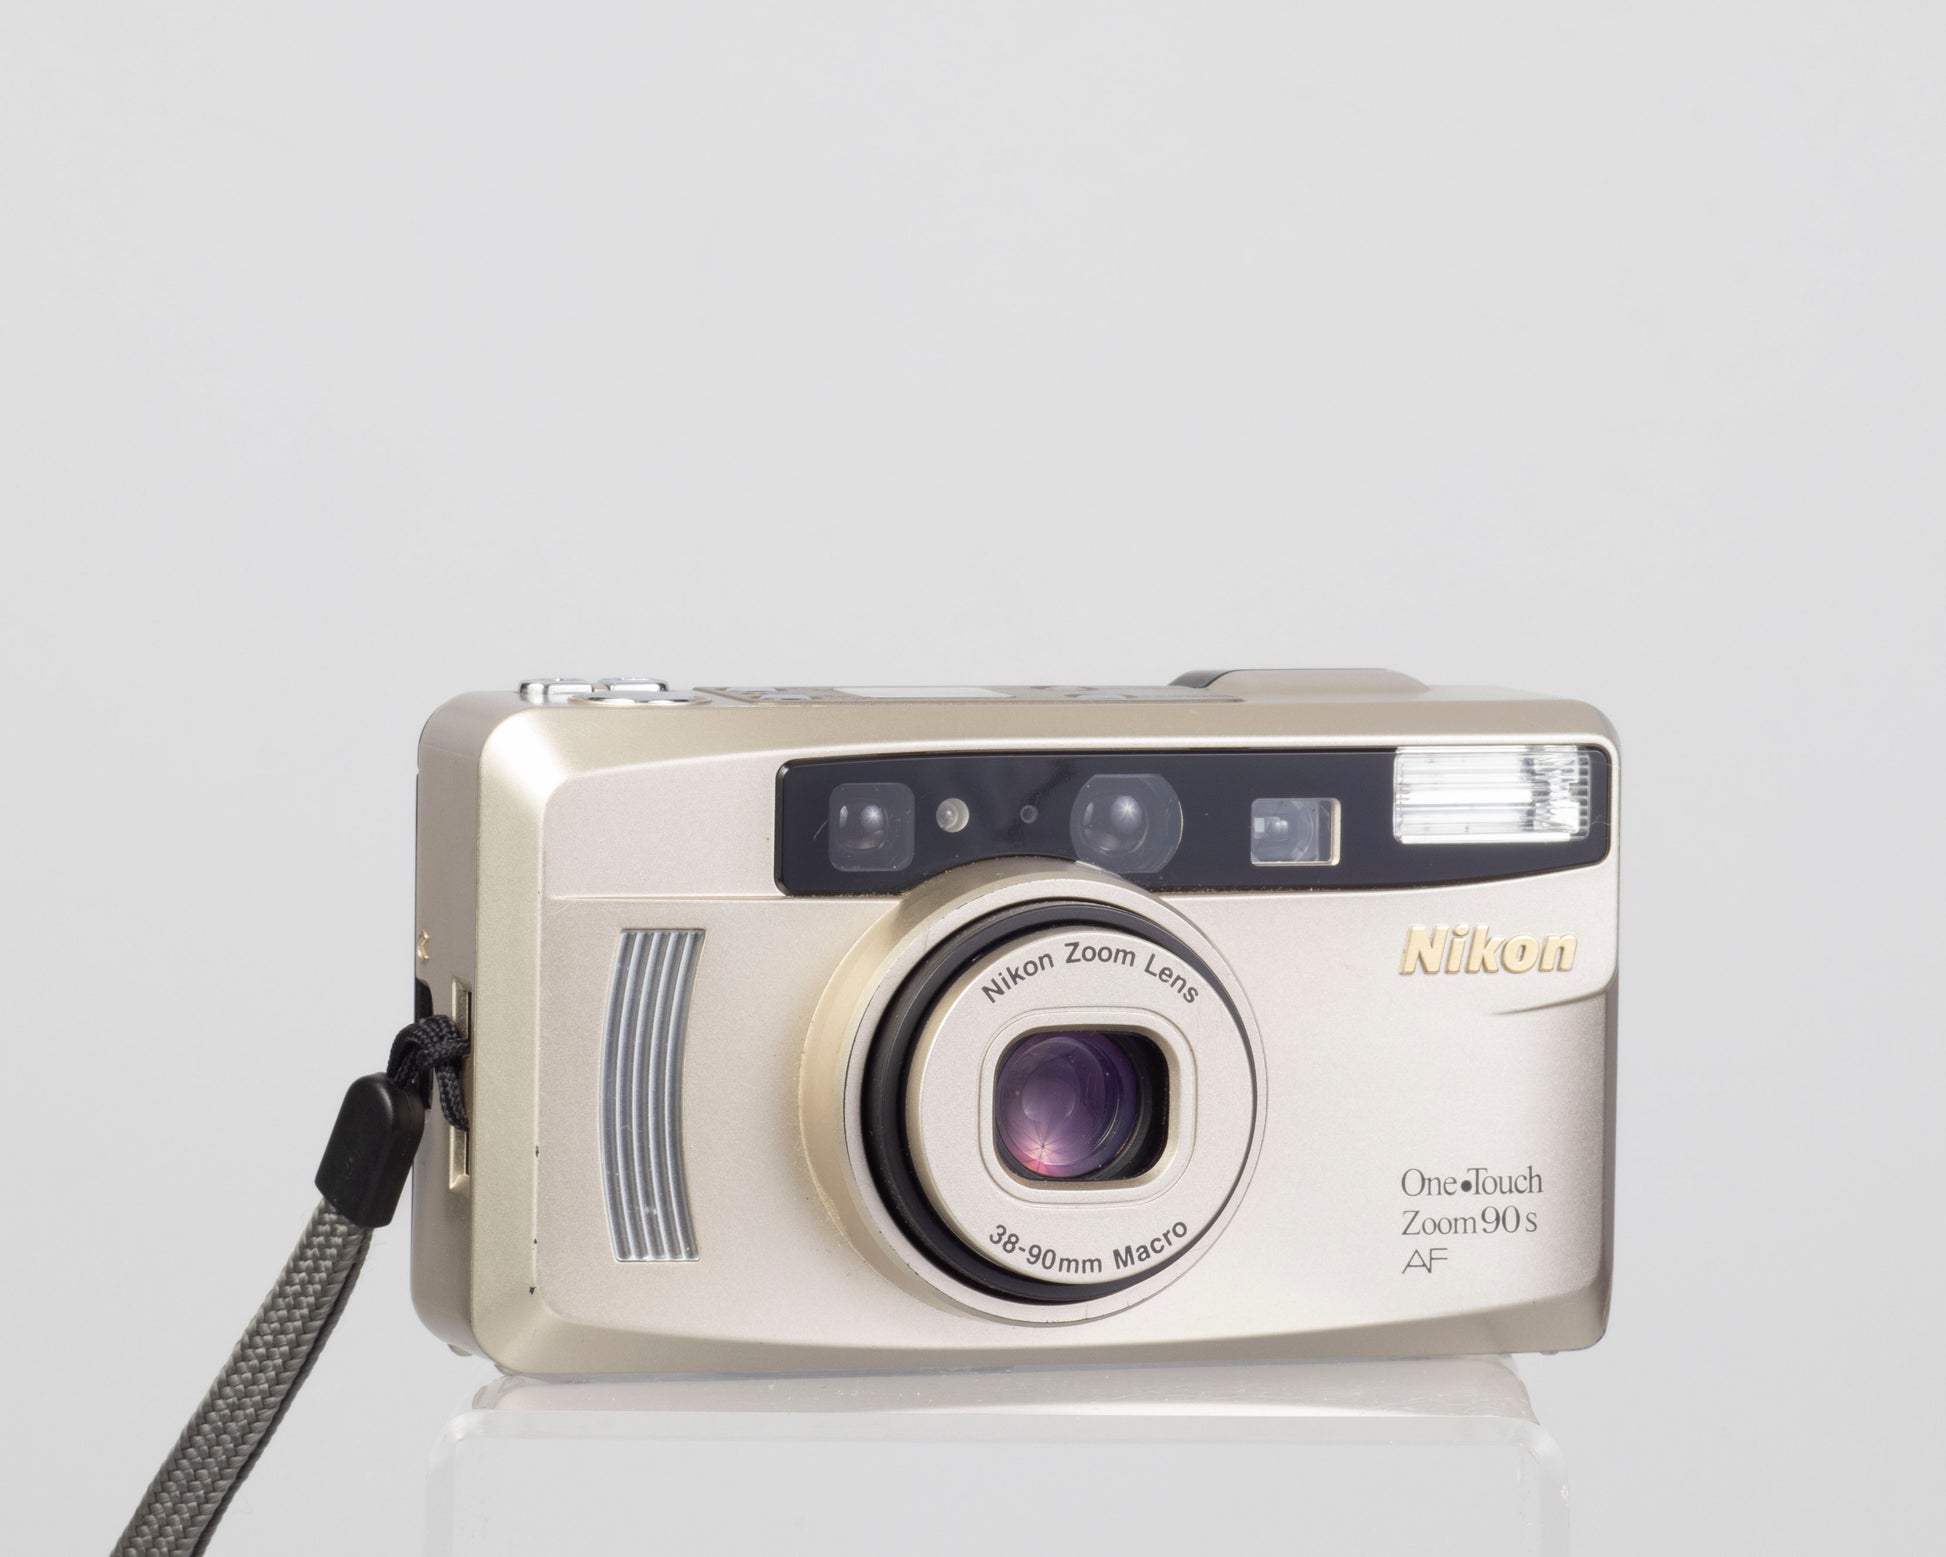 The Nikon One Touch Zoom 90S AF is a quality 35mm point-and-shoot camera from 2002